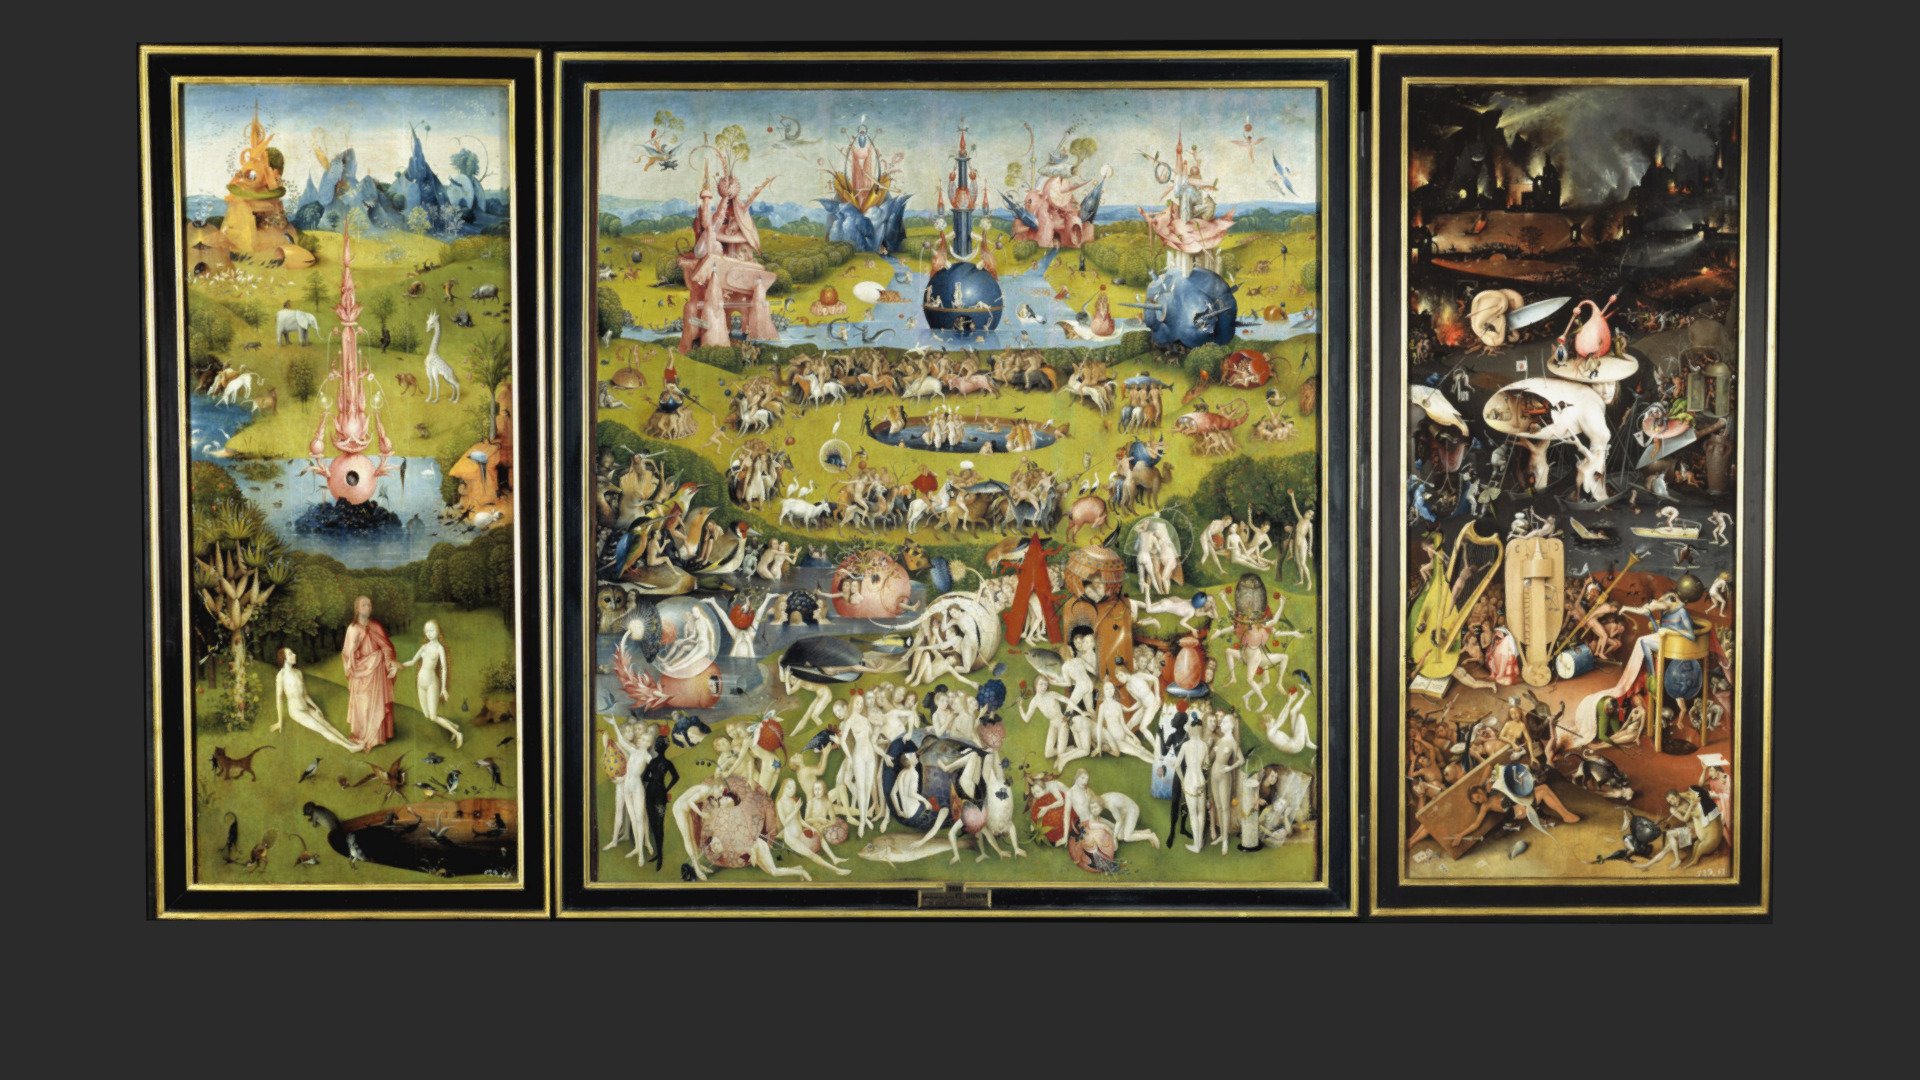 An animated model of the &ldquo;Garden of Earthly Delights